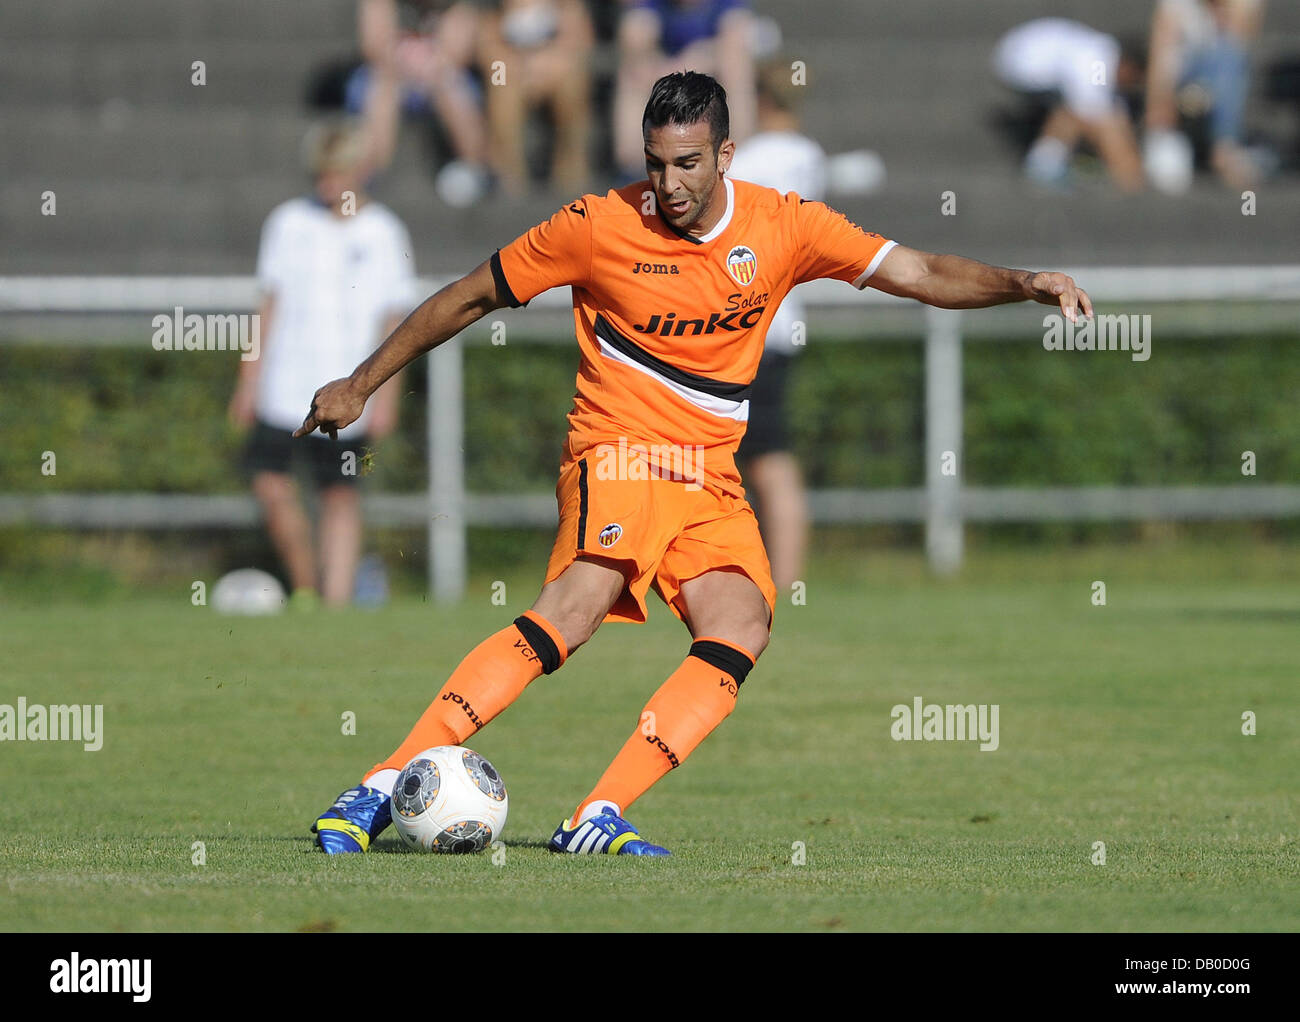 Ludwigsburg, Germany. 20th July, 2013. Adil Rami of Valencia plays the ball during the test match VfB Stuttgart vs FC Valencia in the Ludwig-Jahn-Stadion in Ludwigsburg, Germany, 20 July 2013. Photo: DANIEL MAURER/dpa/Alamy Live News Stock Photo